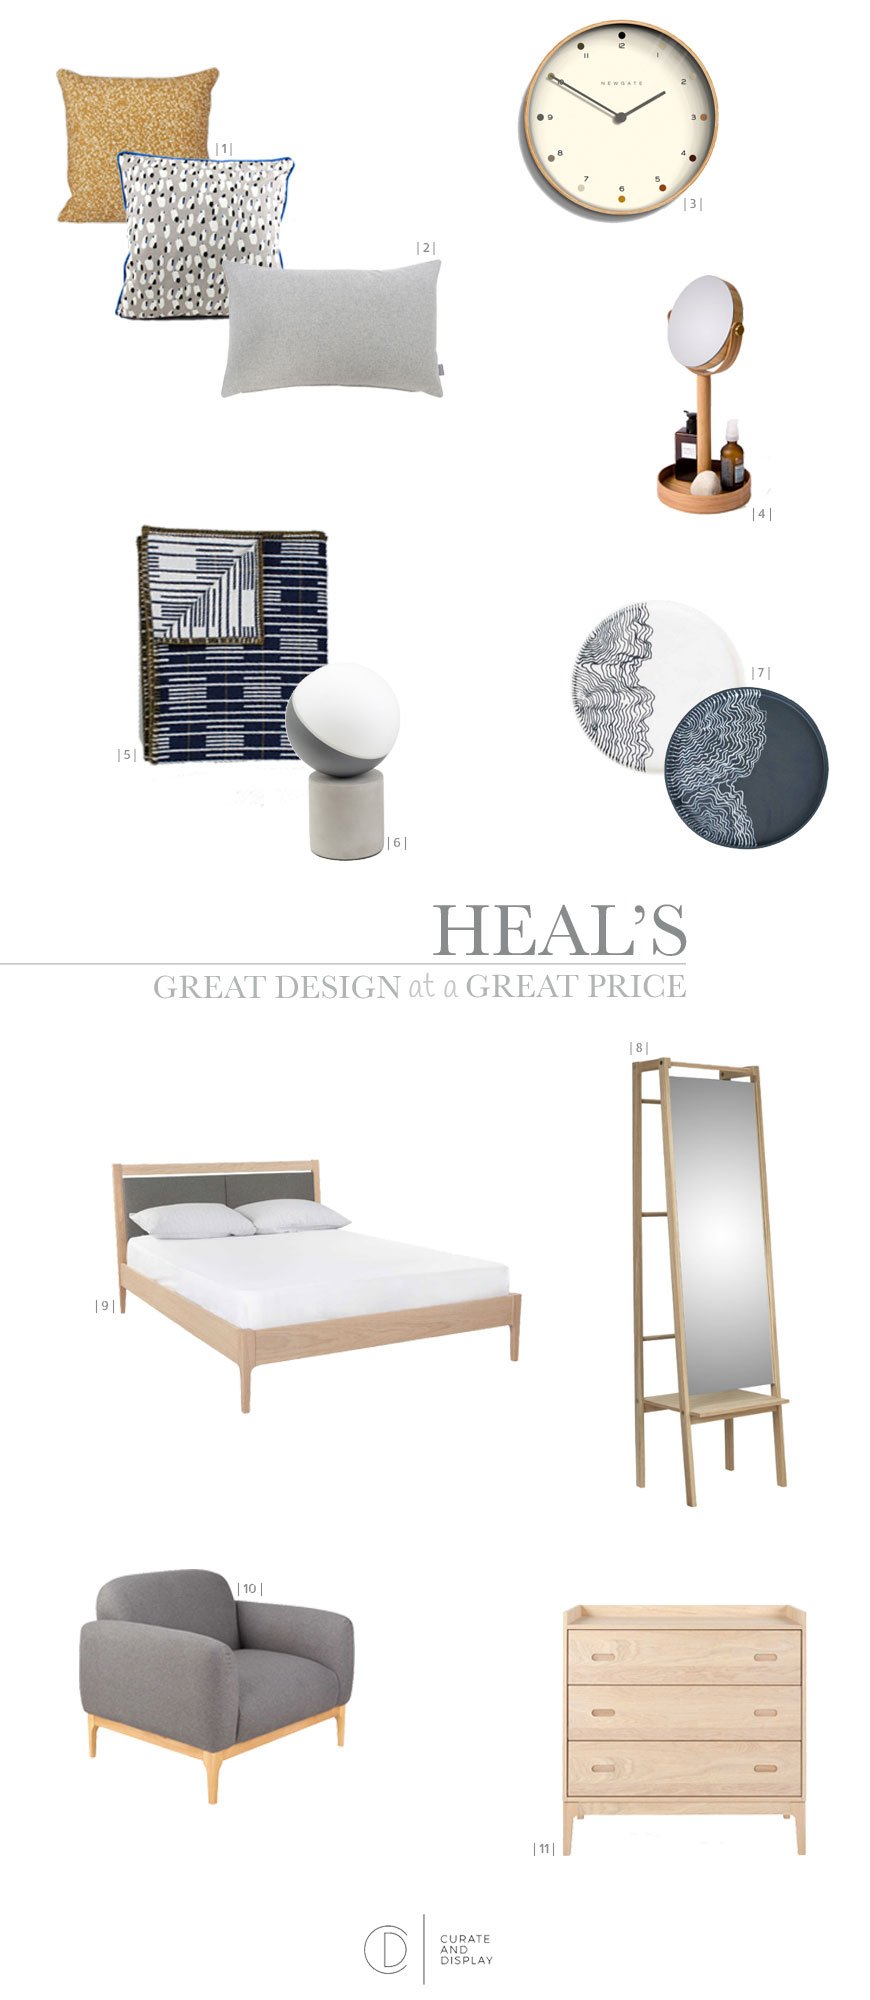 Heal's Scandi inspired Morten furniture collection, designed by John Jenkins, blue bedroom styling, visual merchandising, window styling, window dressing, shopping page